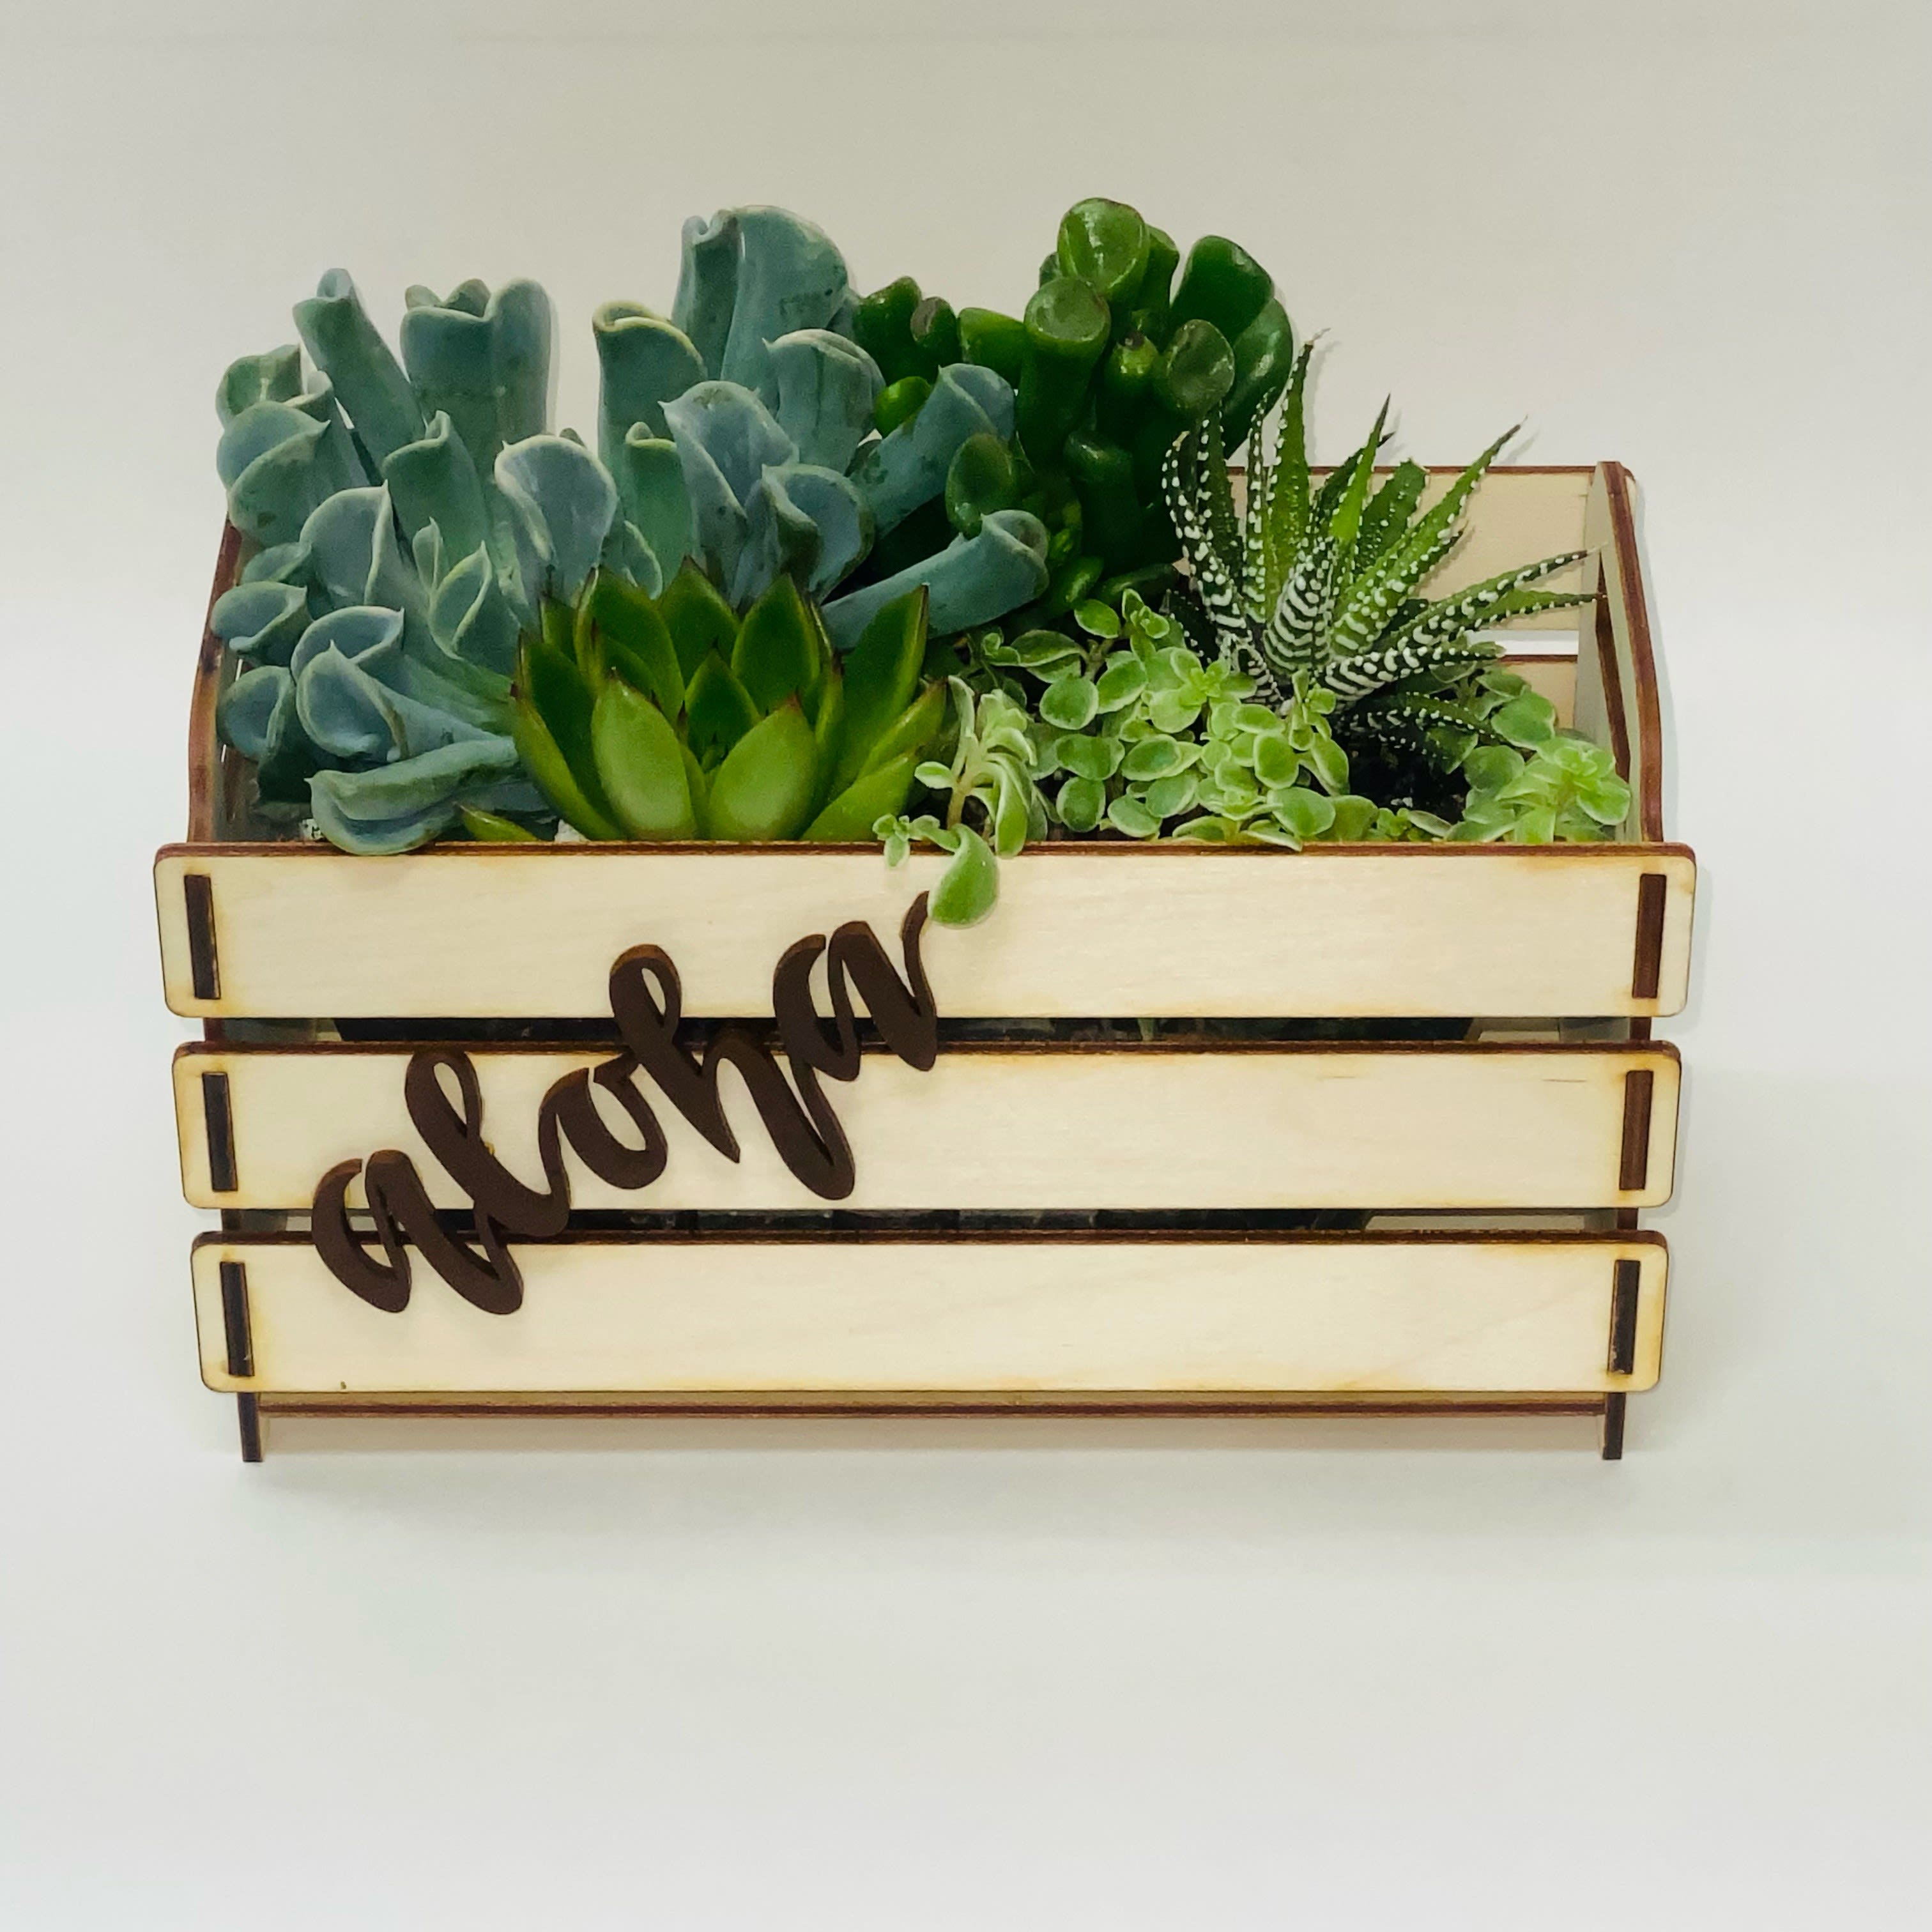 Local item: Succulent Box  - This adorable Succulent box is a little larger than the smaller box and will set perfectly on a desk or end table.  Great for your home or as a gift!  From the North Shore of Oahu!